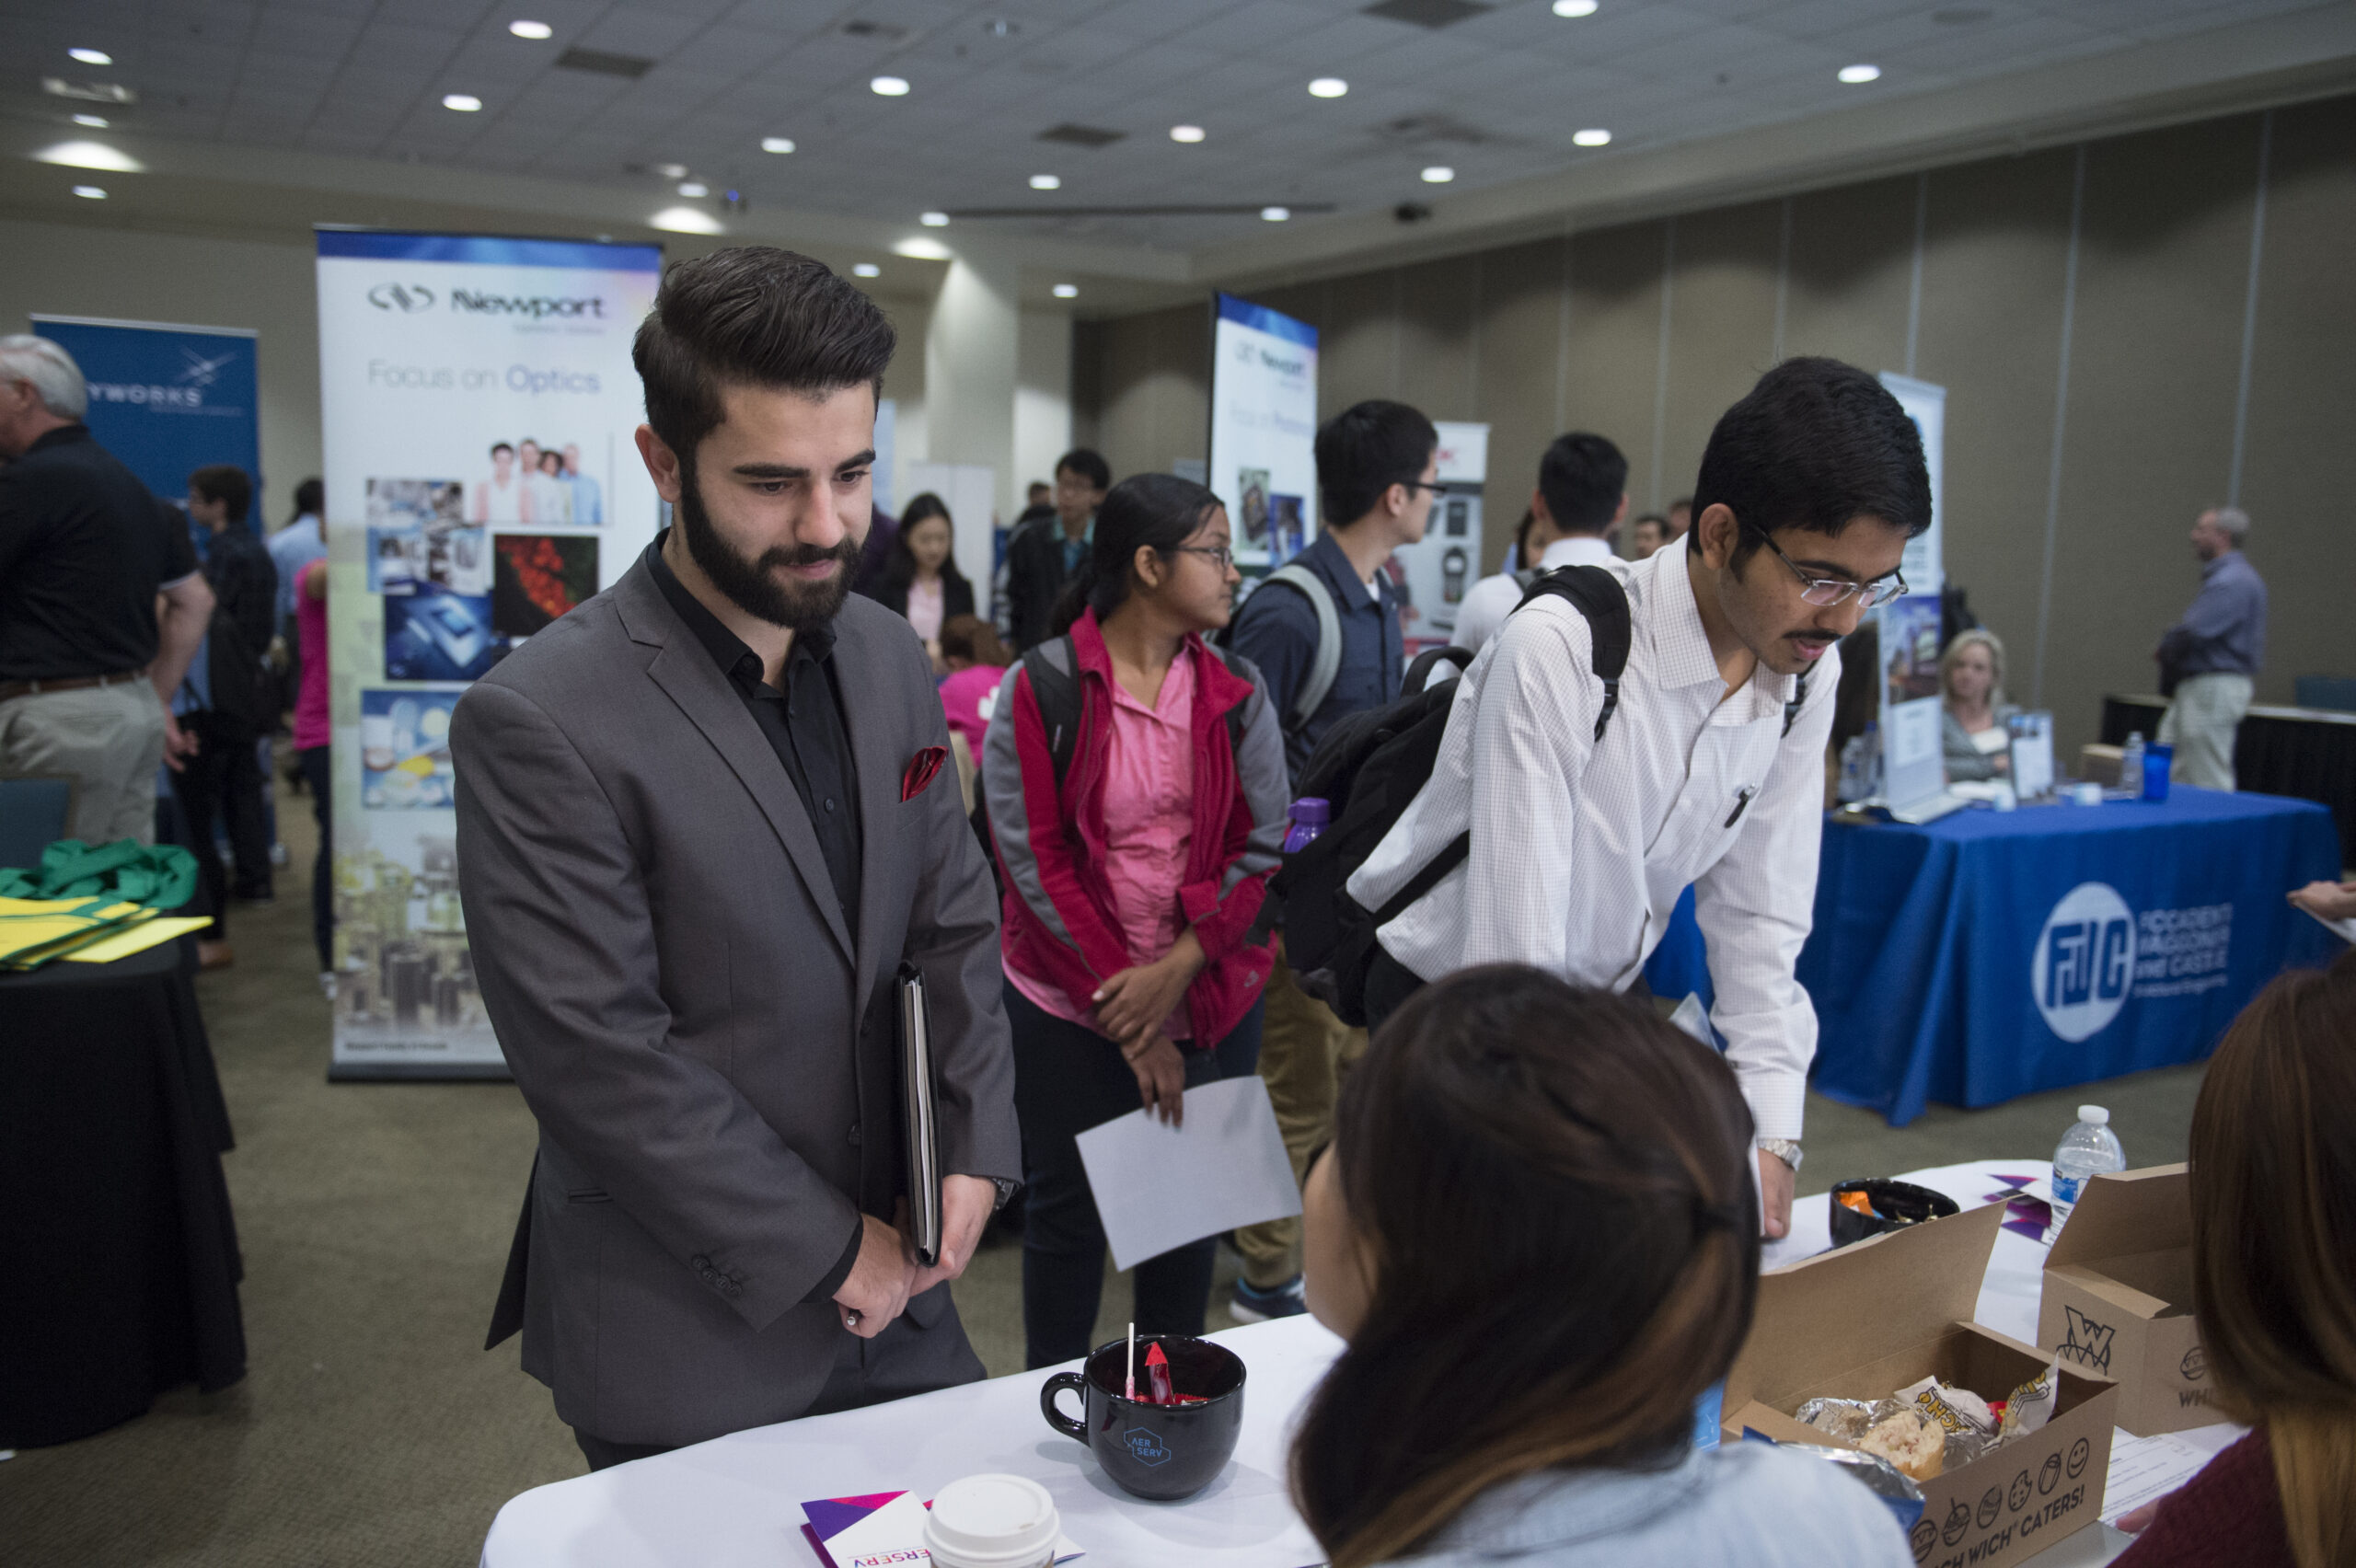 Engineering Students talk to potential employers in the engineering field